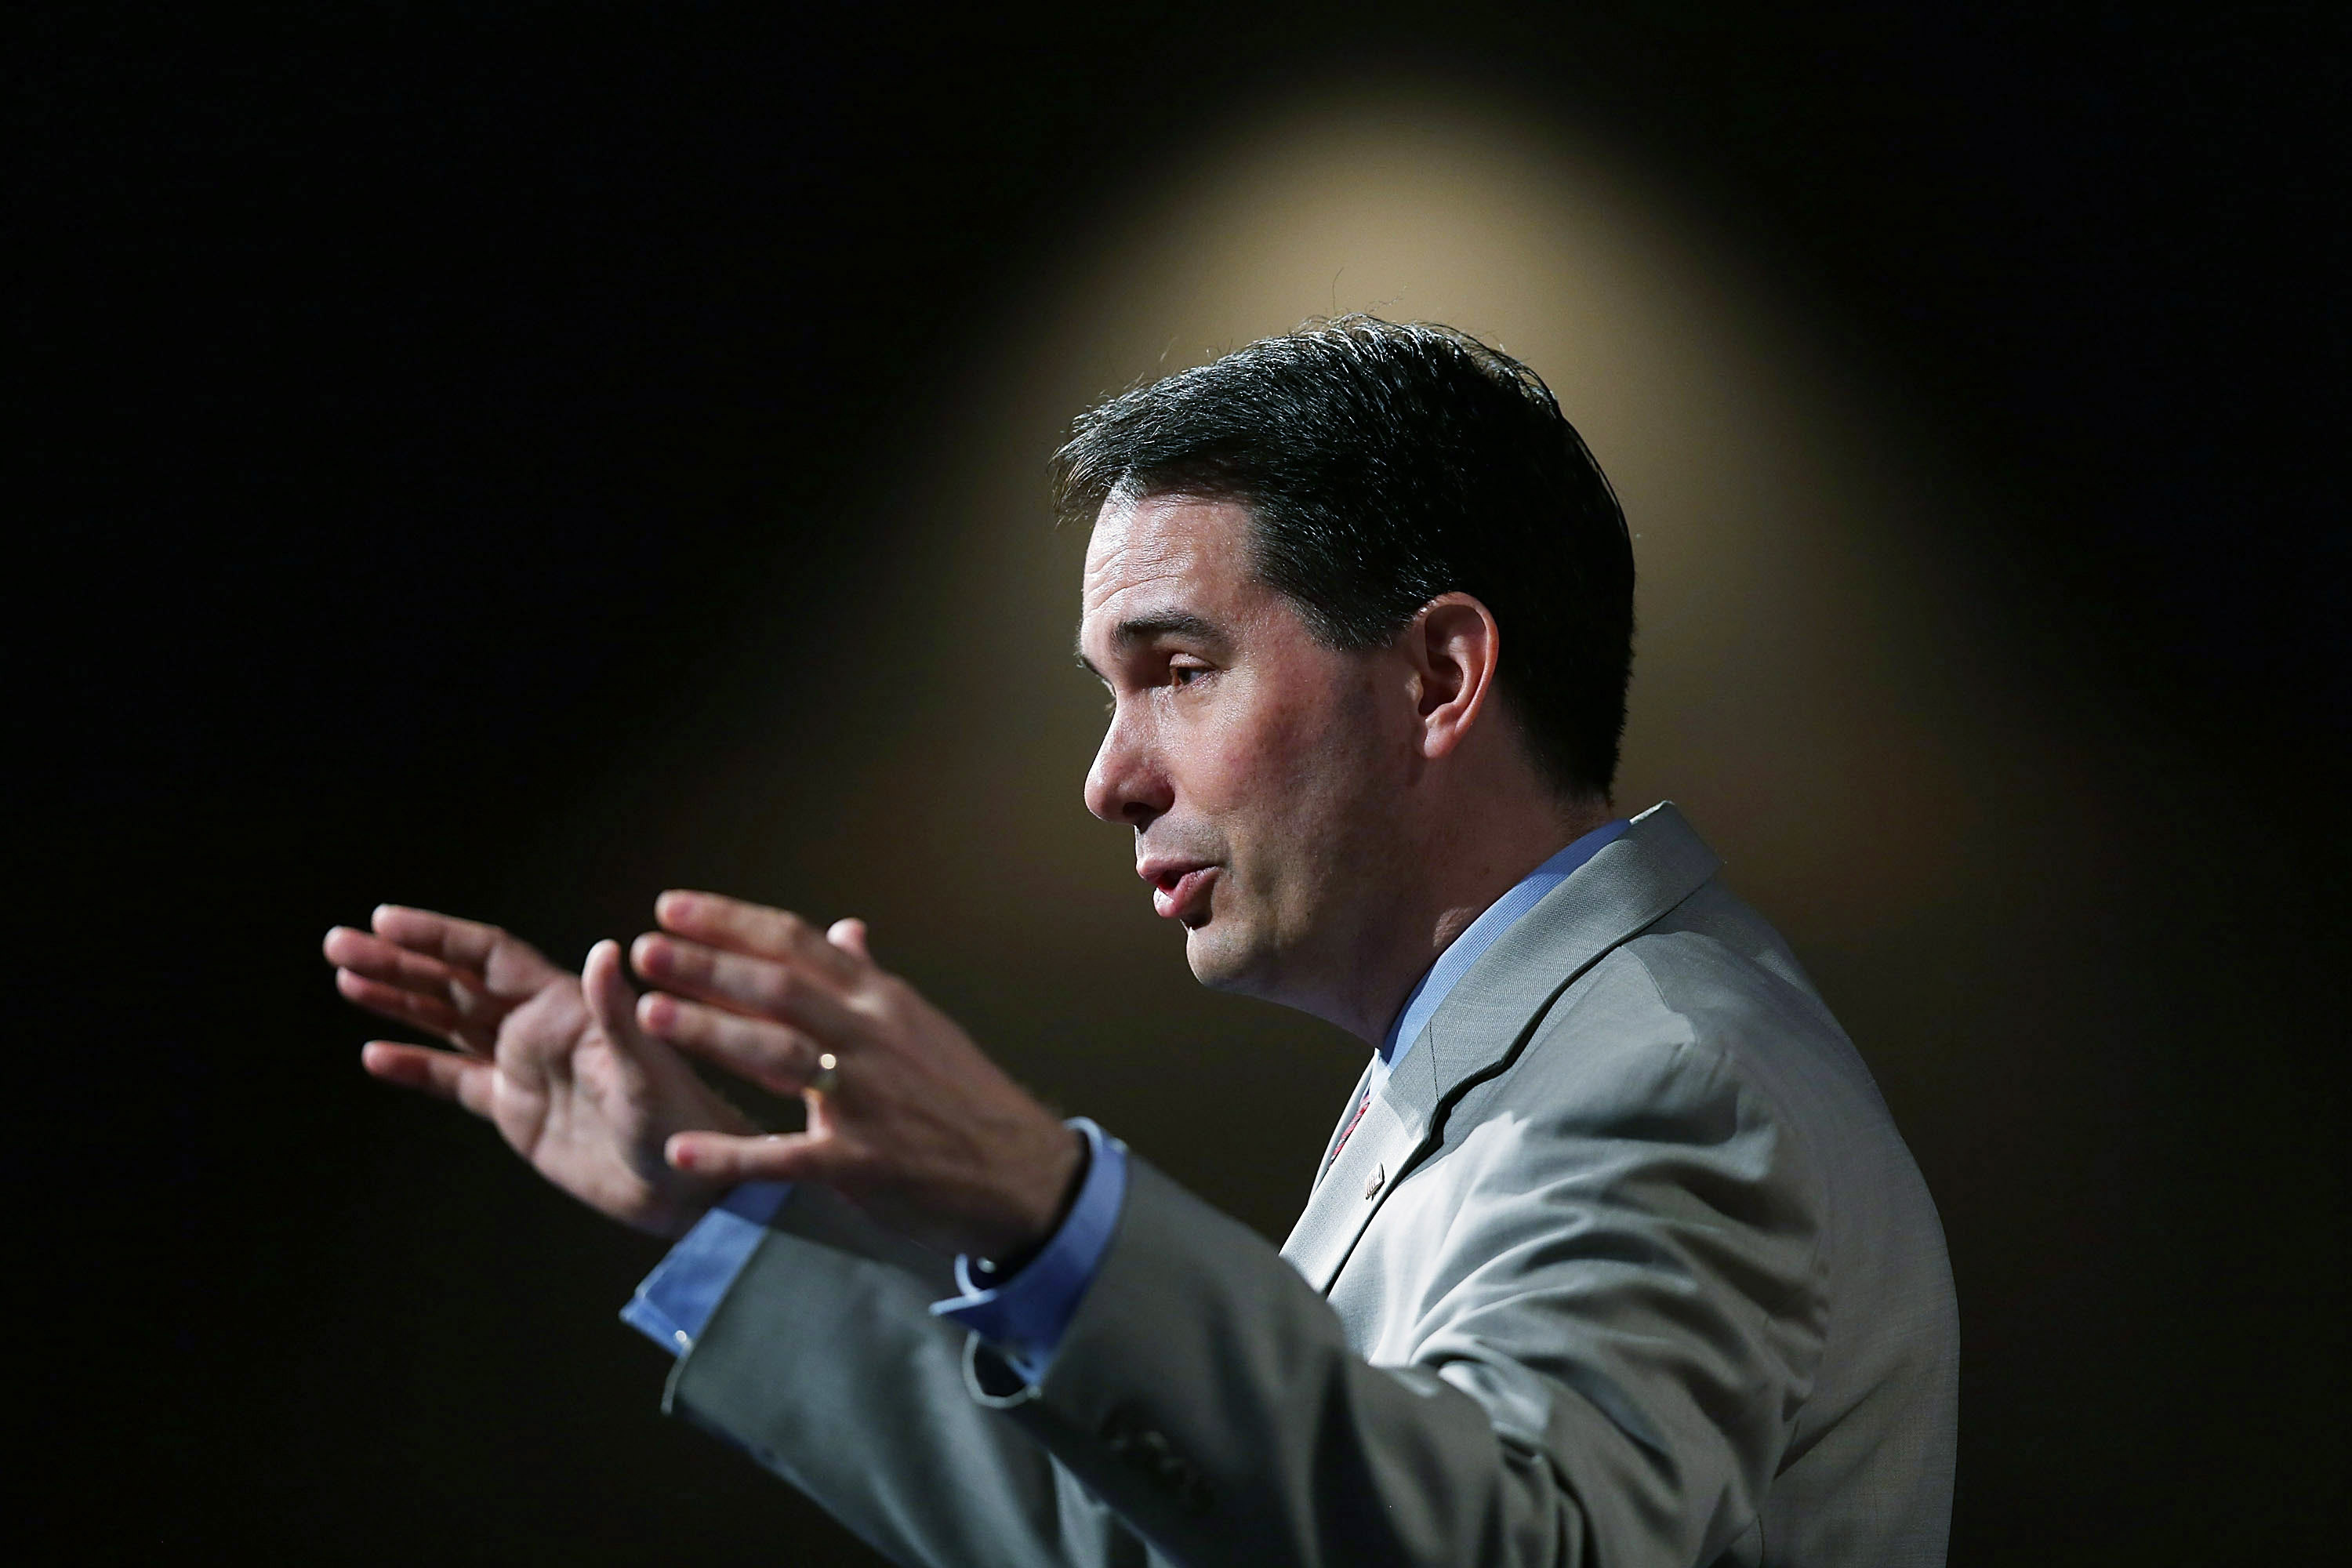 Wisconsin Governor Scott Walker speaks during the Rick Scott's Economic Growth Summit held at the Disney's Yacht and Beach Club Convention Center on June 2, 2015 in Orlando, Florida. (Joe Raedle/Getty Images)